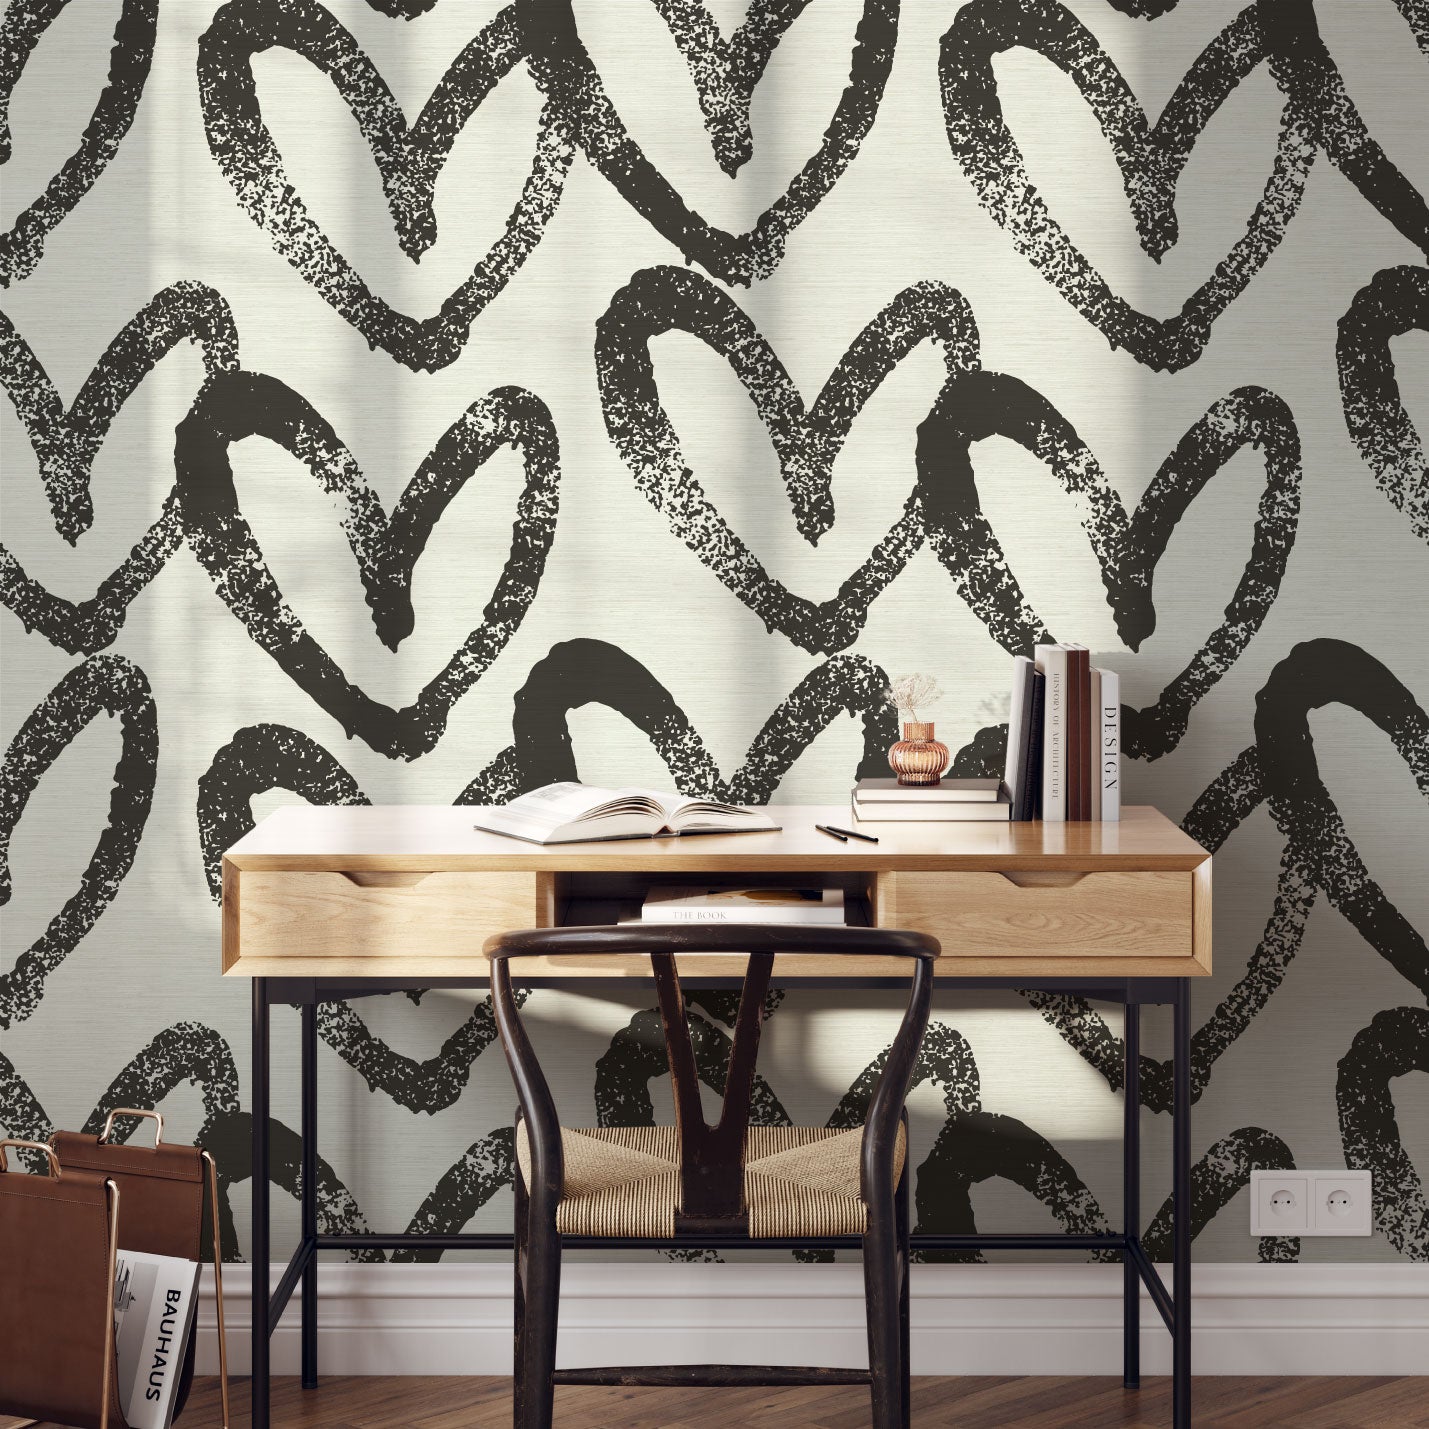 Load image into Gallery viewer, printed grasscloth wallpaper oversized heart print assortment collaboration with House of Shannon shan Natural Textured Eco-Friendly Non-toxic High-quality Sustainable practices Sustainability Interior Design Wall covering Bold Wallpaper Custom Tailor-made Retro chic kids playroom hand drawn fun cream natural neutral black off-white office study library
